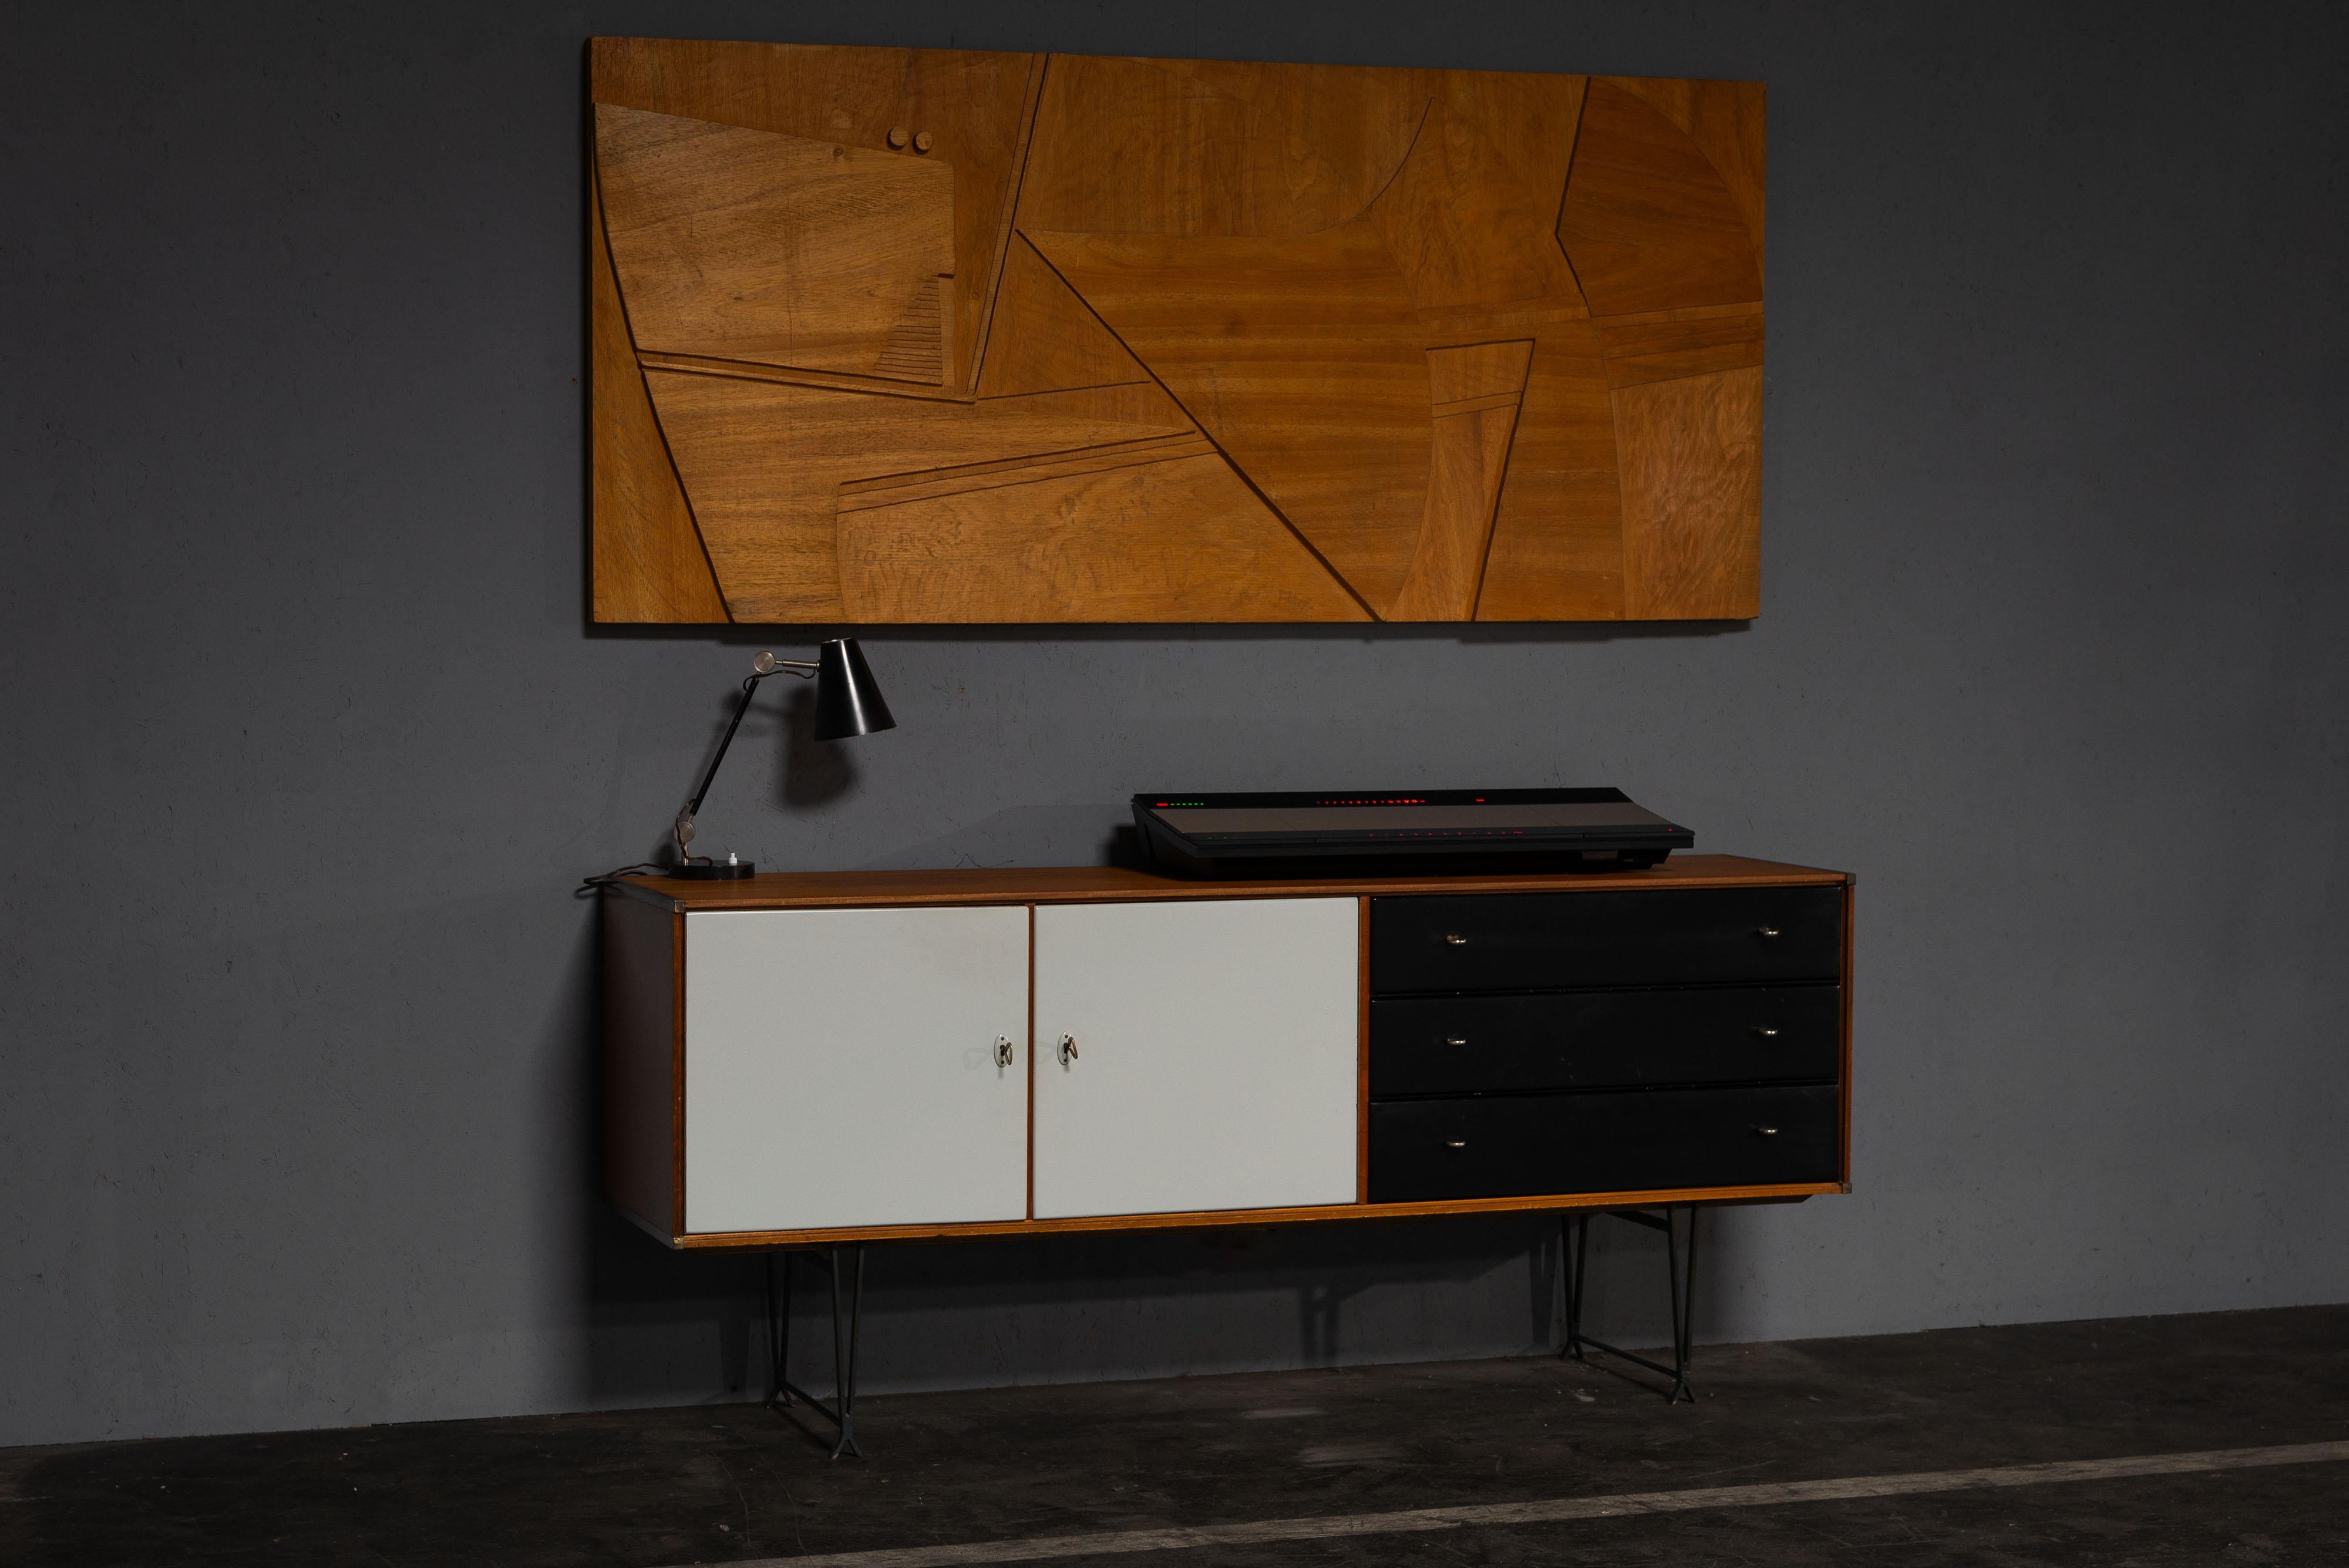 Very nice and rare small sideboard designed by William Watting and manufactured by Fristho Franeker, The Netherlands 1954. Made from teak wood, it features stylish black drawers and grey-painted door fronts, giving it a unique and modern look.